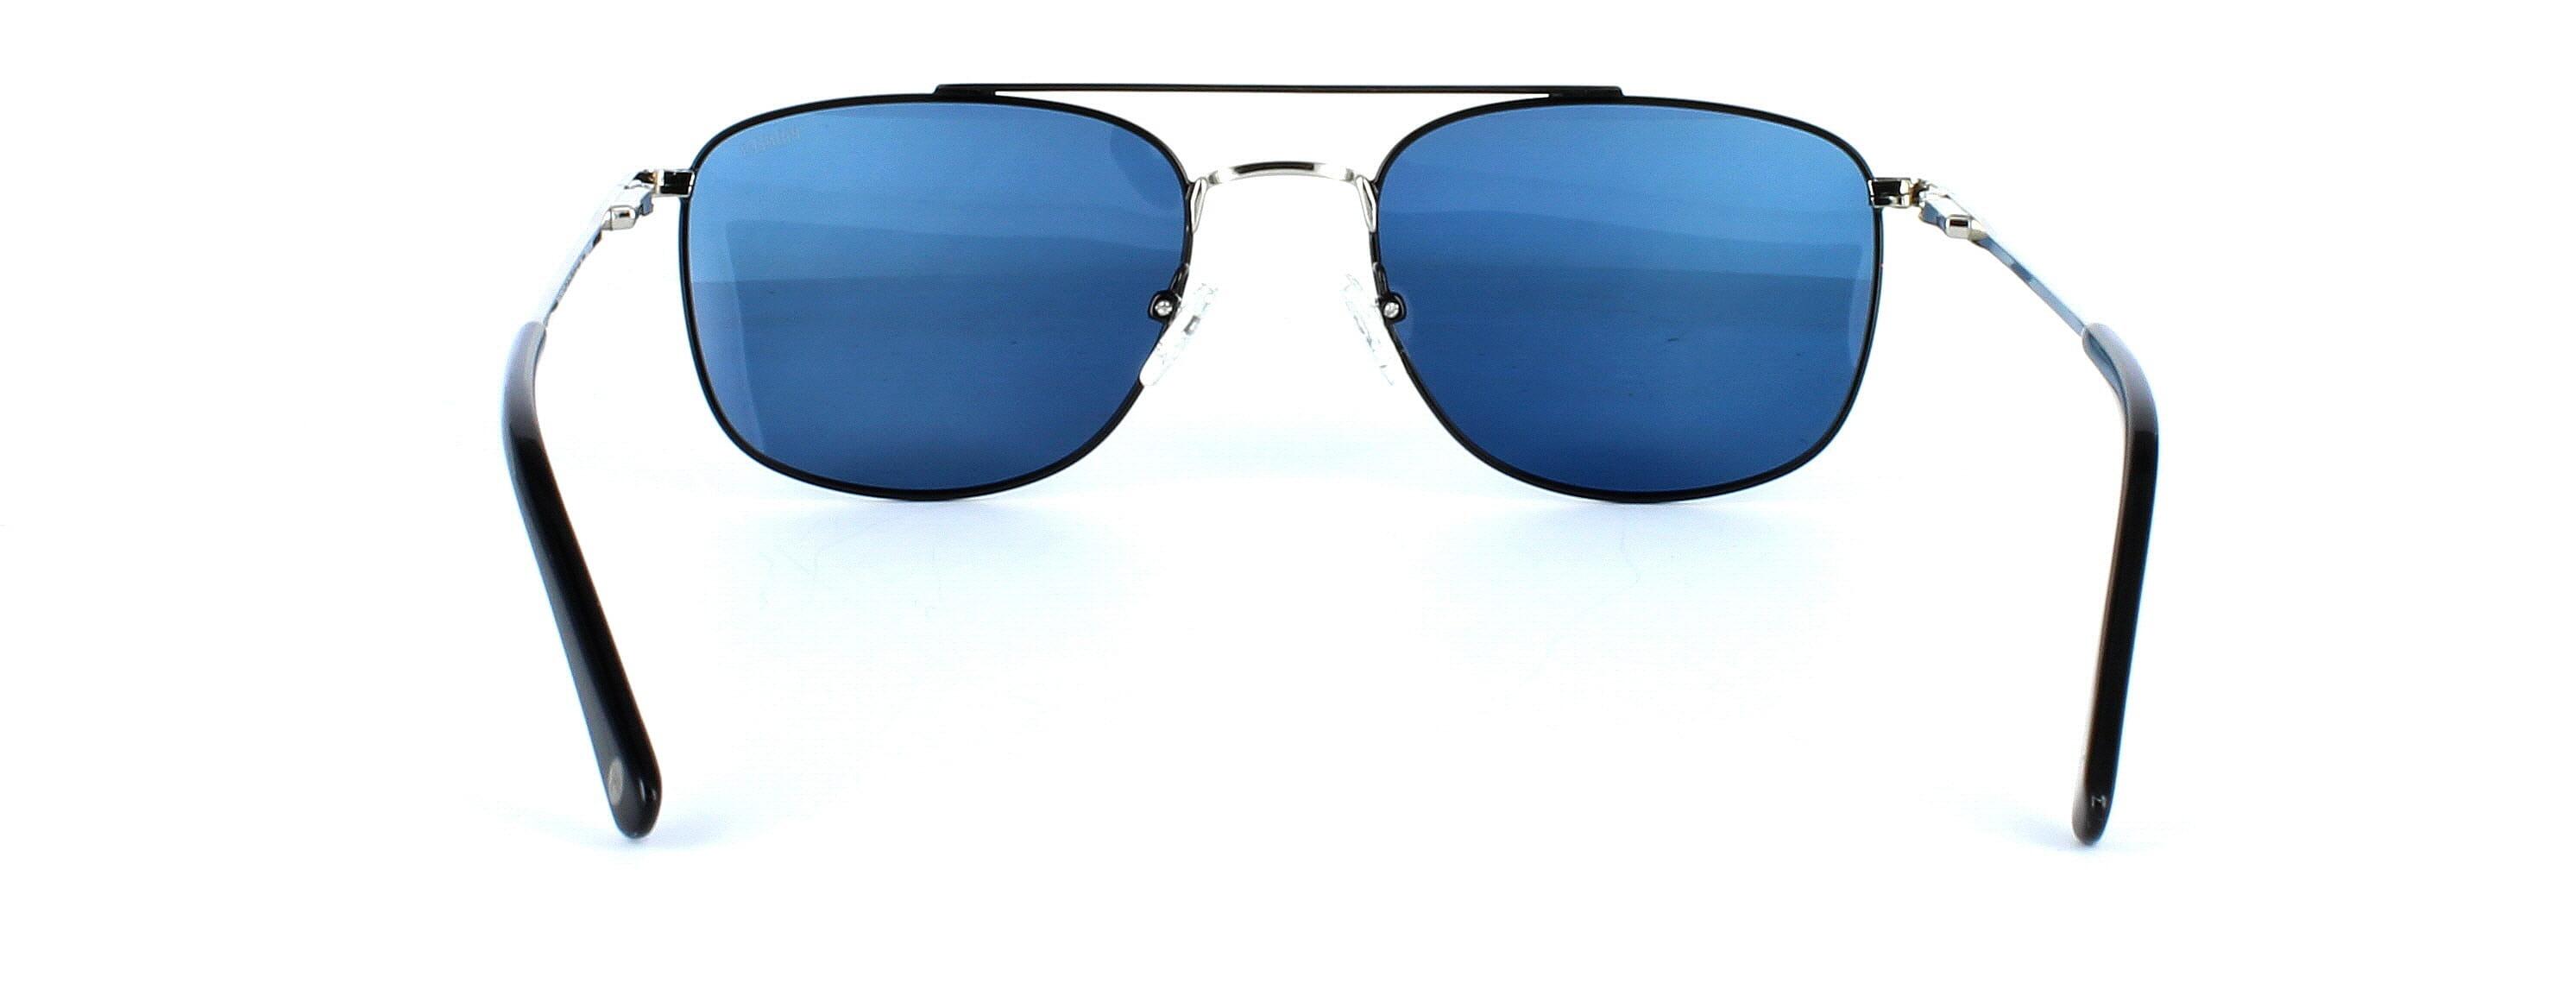 Carlo - Unisex 2-tone aviator style sunglasses here in black and silver - image view 2